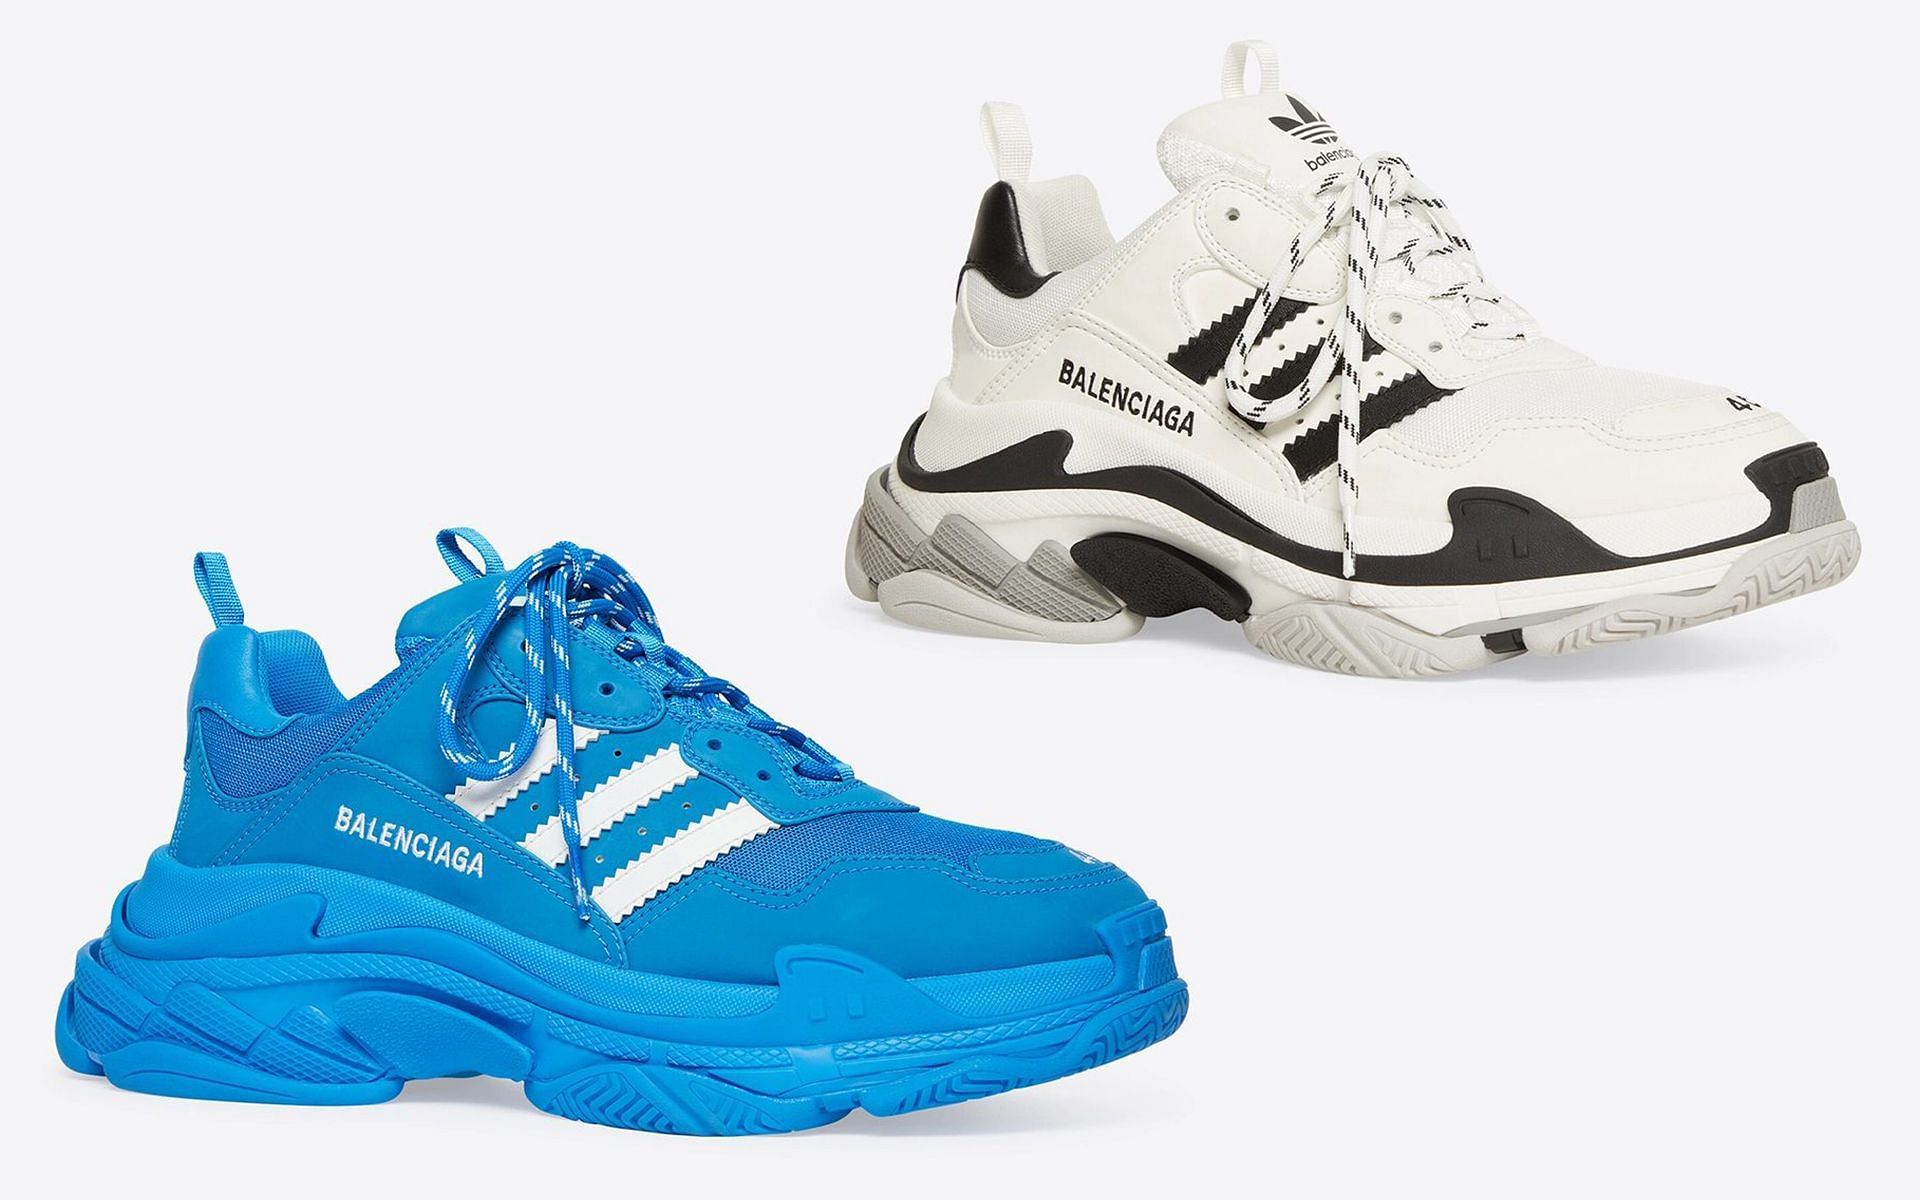 Where to buy Balenciaga X Adidas footwear collection? Release date, and more explored